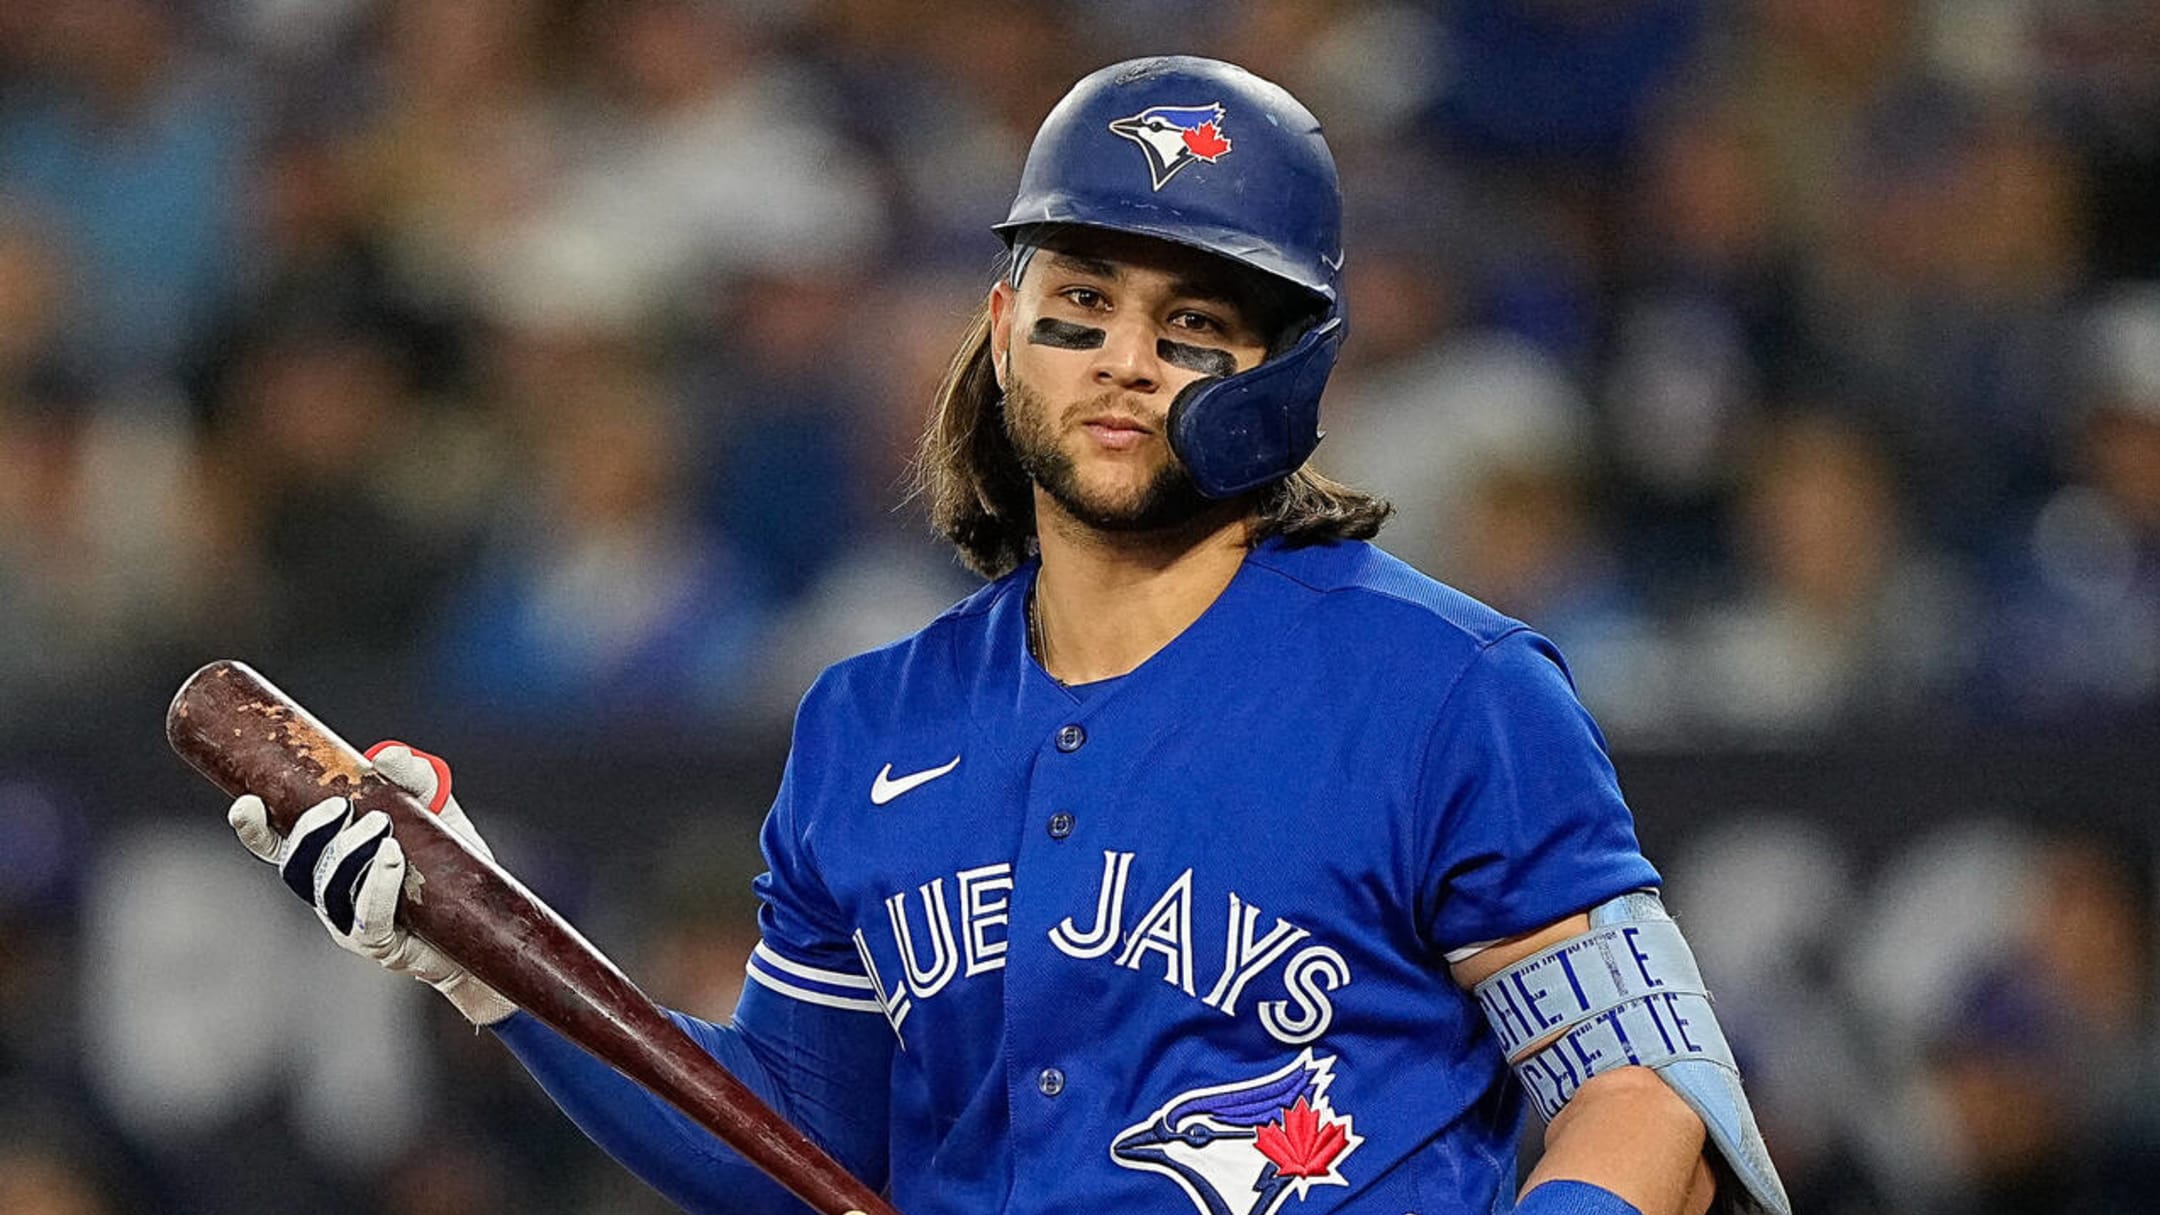 Blue Jays' Bichette: 'I don't disagree' with managerial change